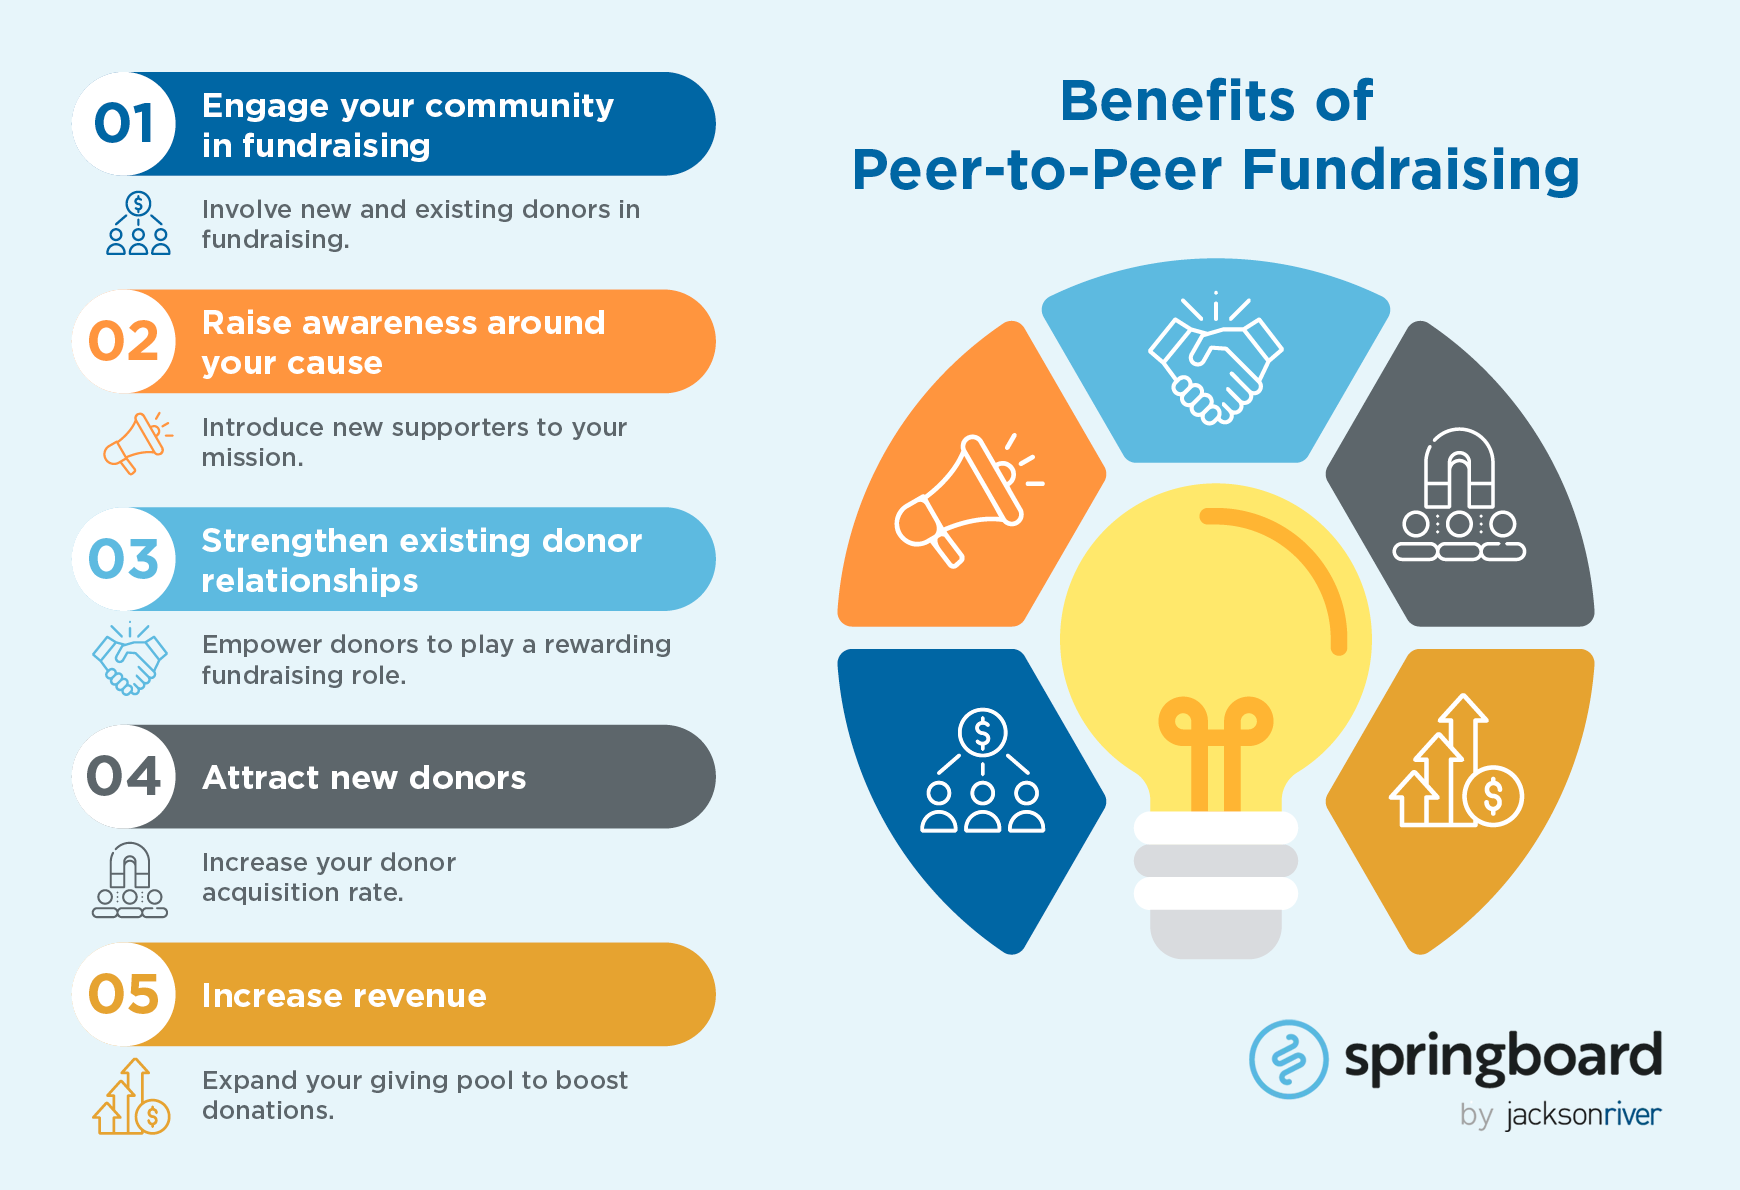 There are many benefits to peer-to-peer fundraising with Salesforce, repeated below.